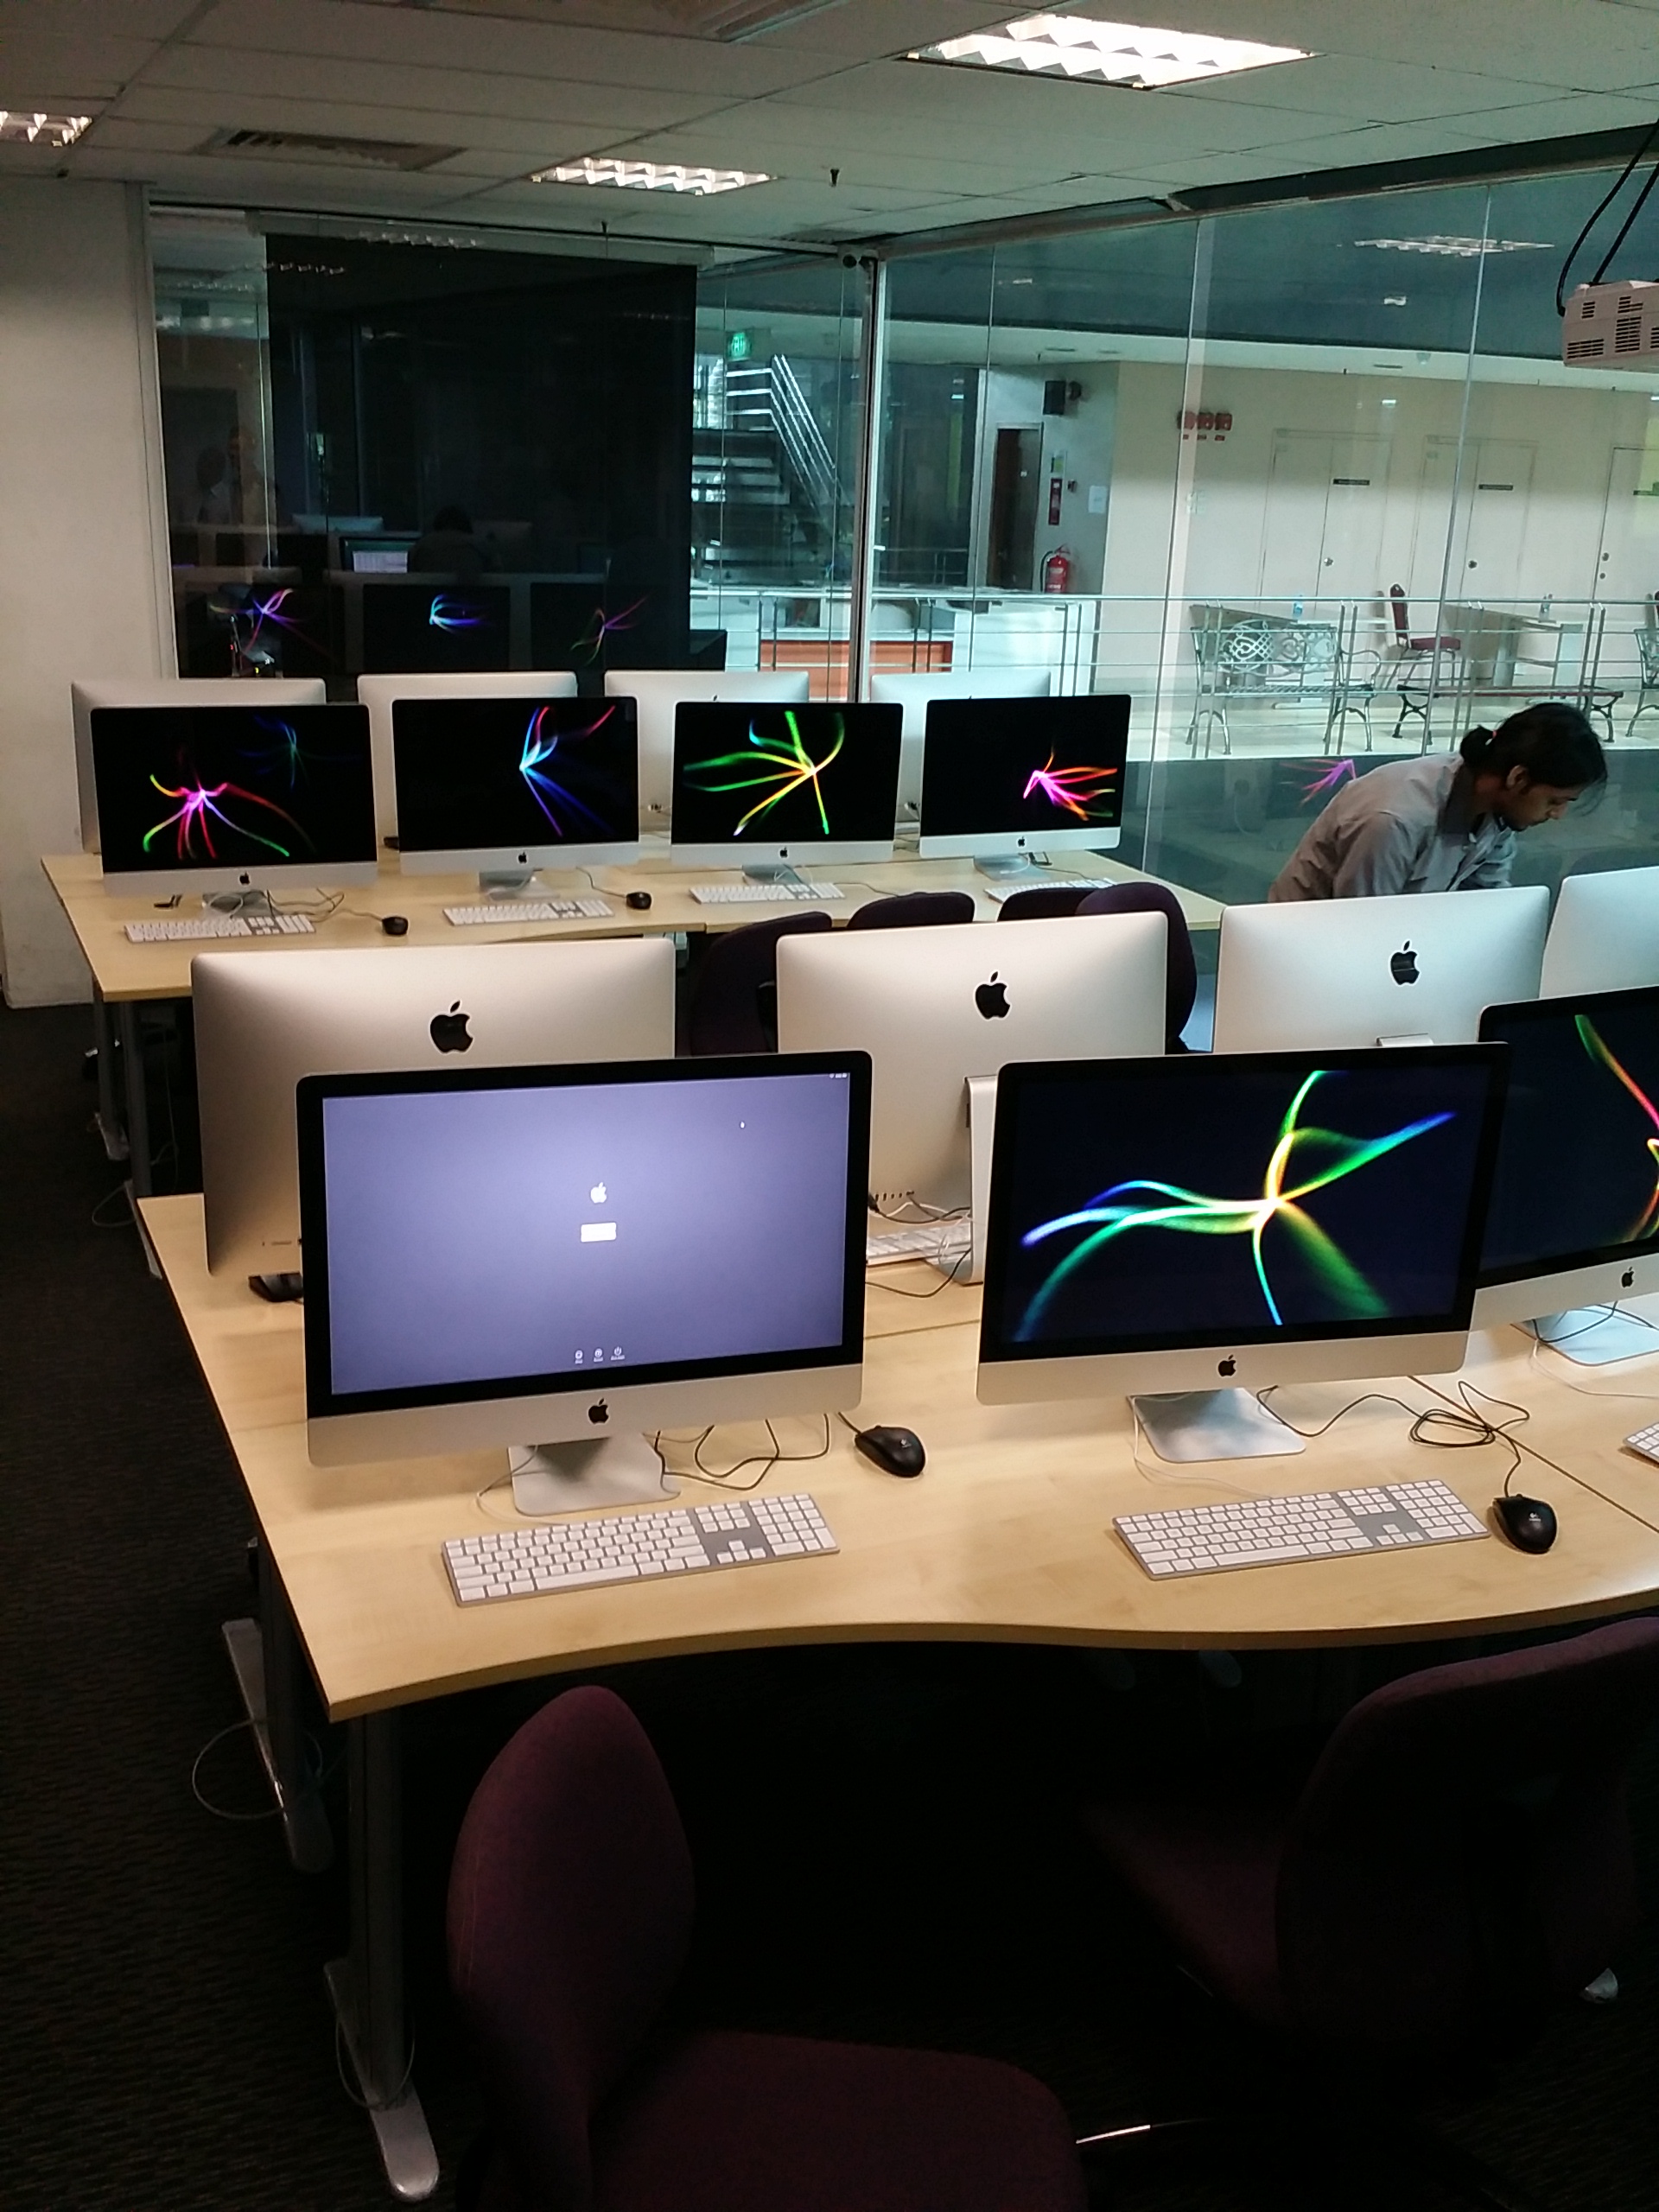 Dual-core Macs at APIIT and Asia Pacific University for the animation & design students